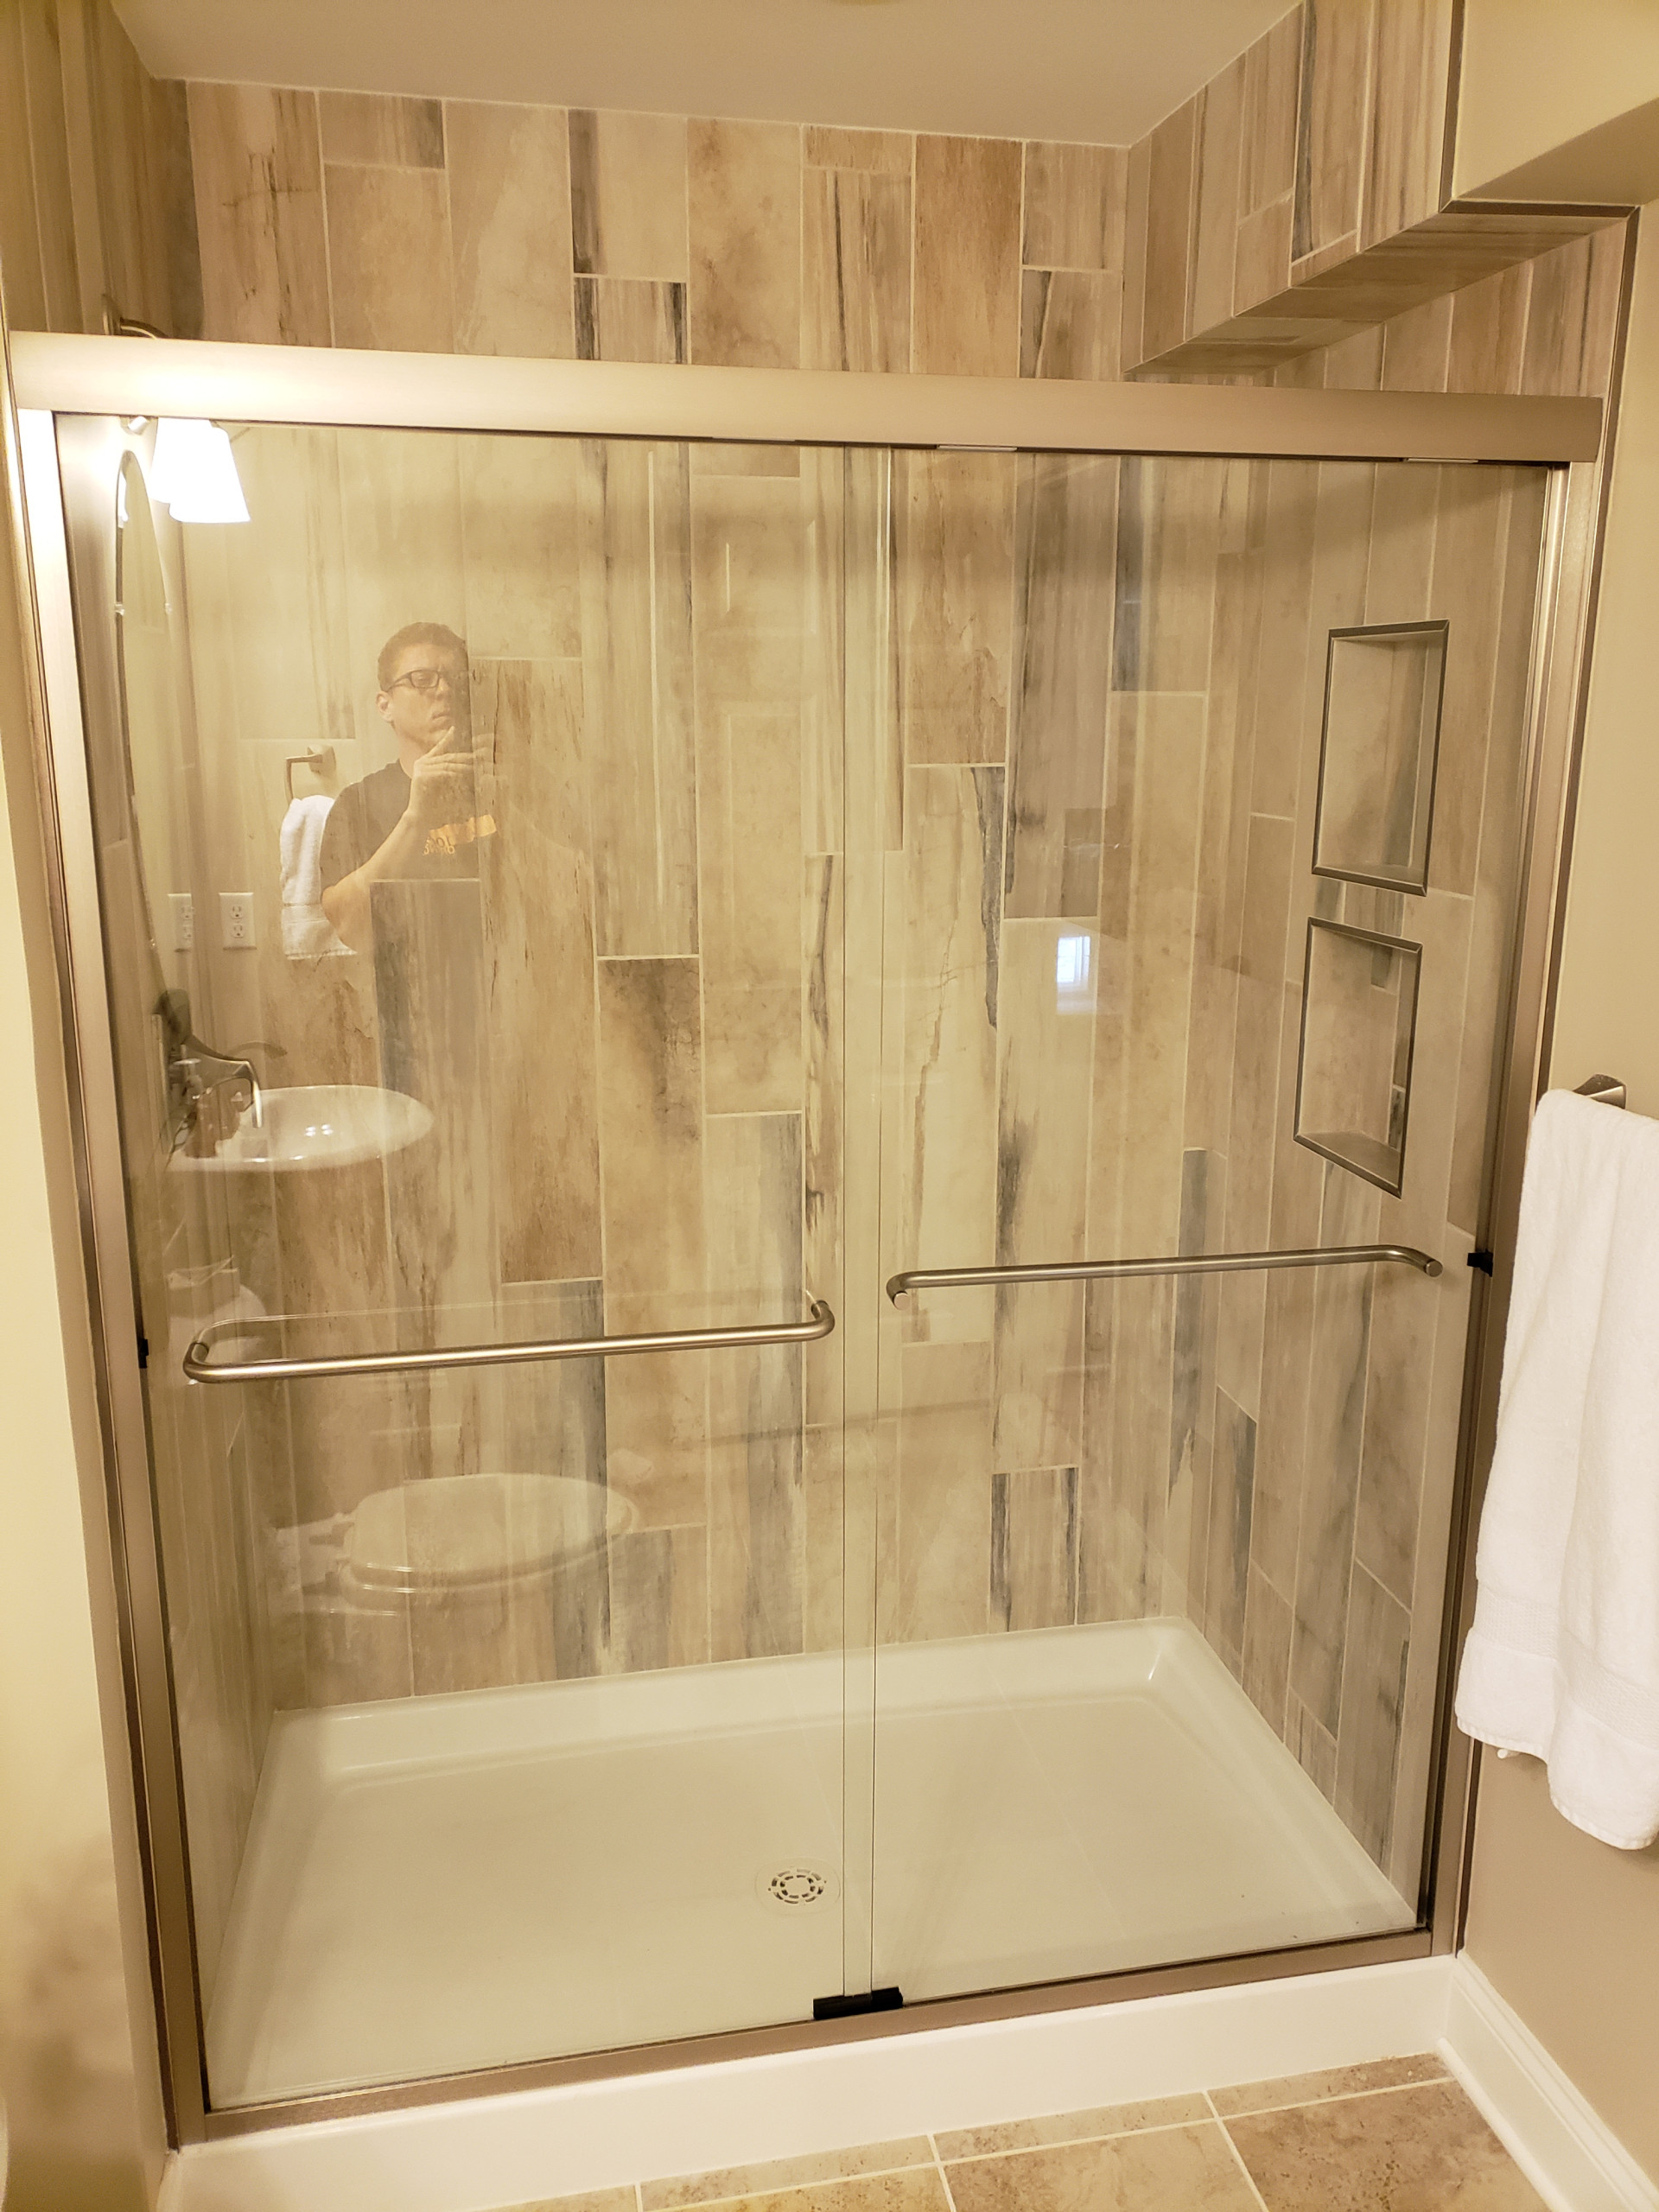 Showfield, 36 inch plank tile shower. March 2020